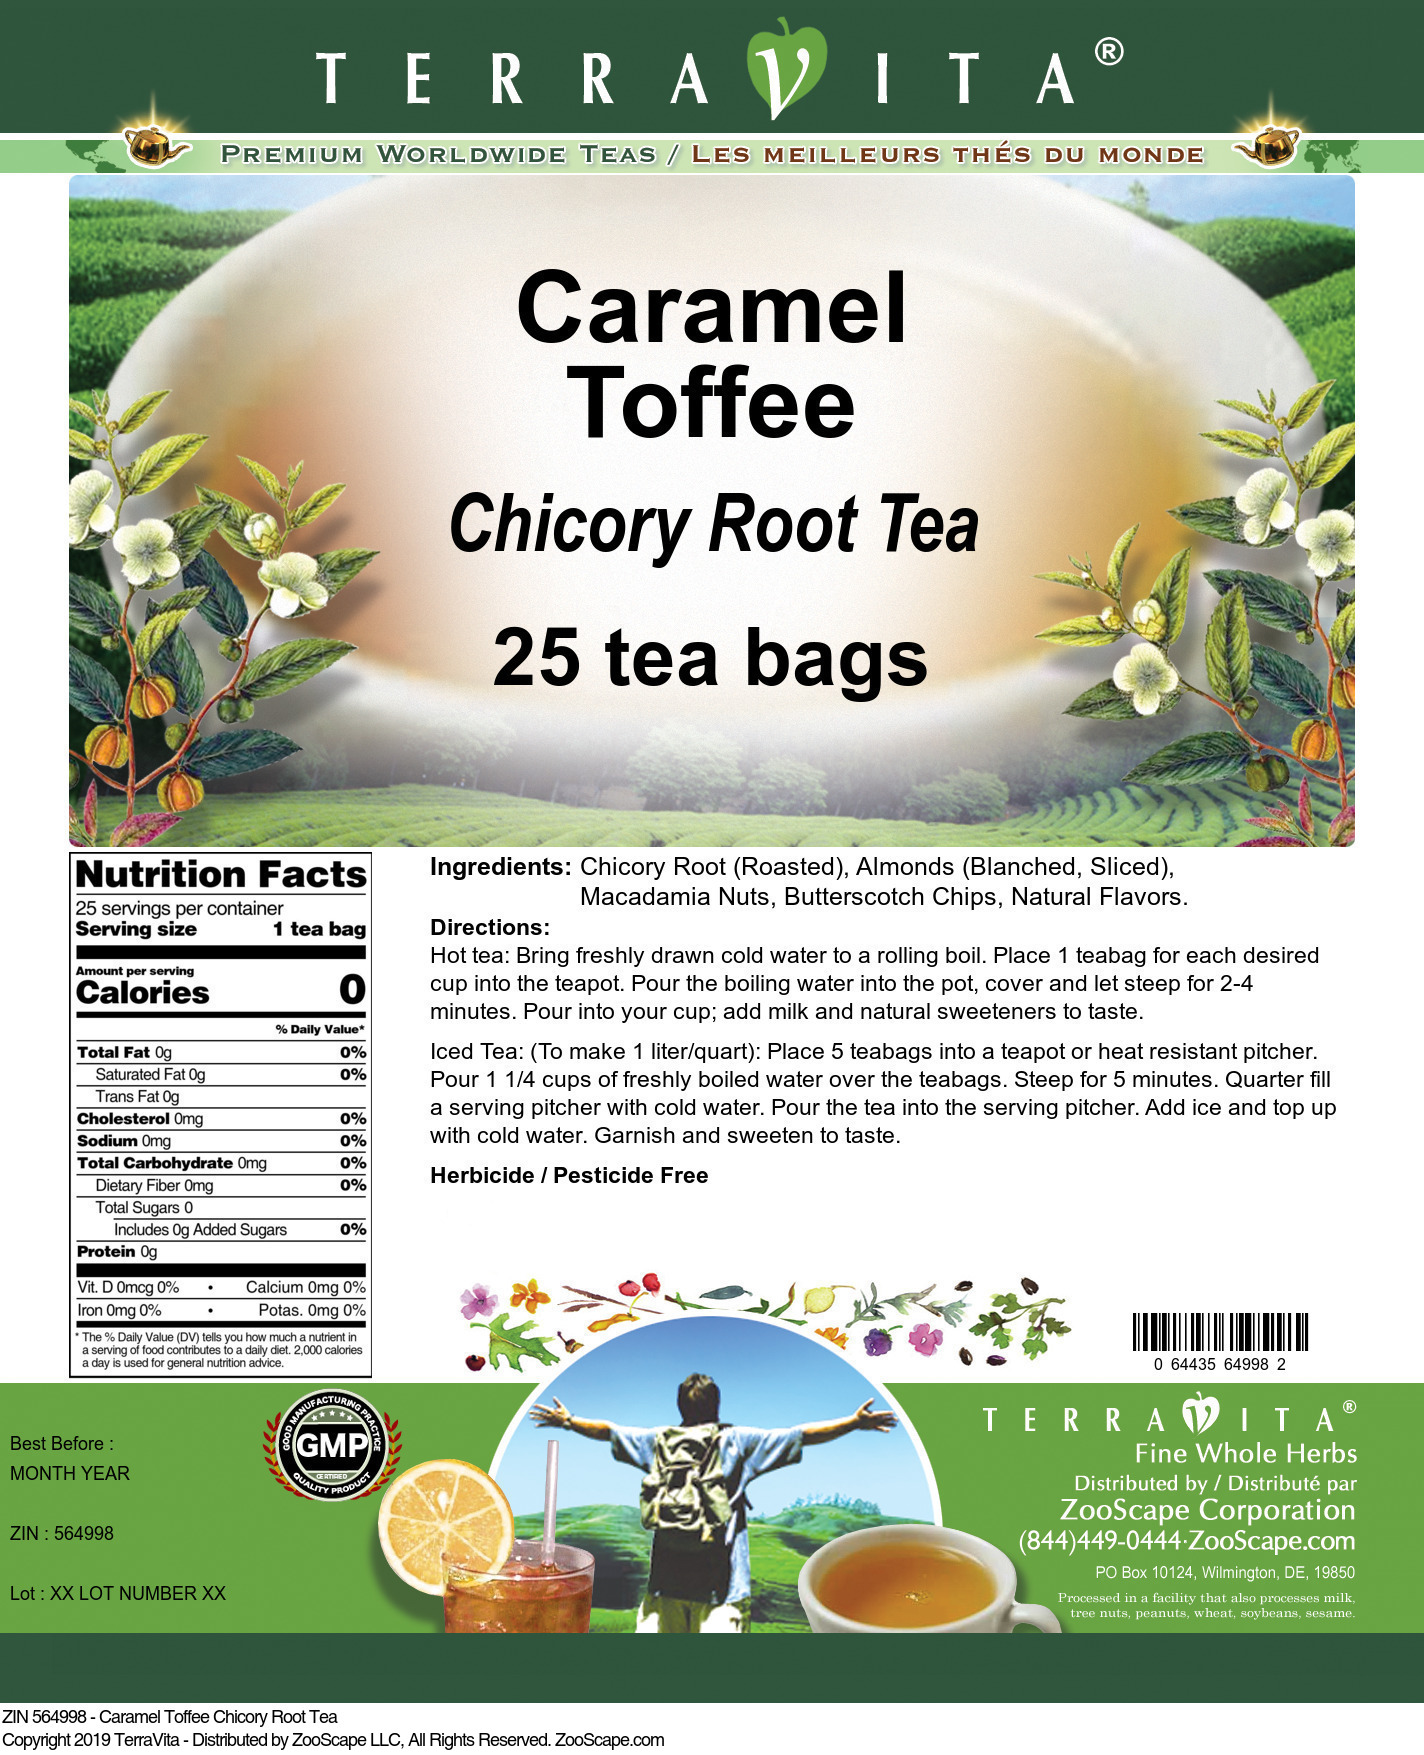 Caramel Toffee Chicory Root Tea - Label